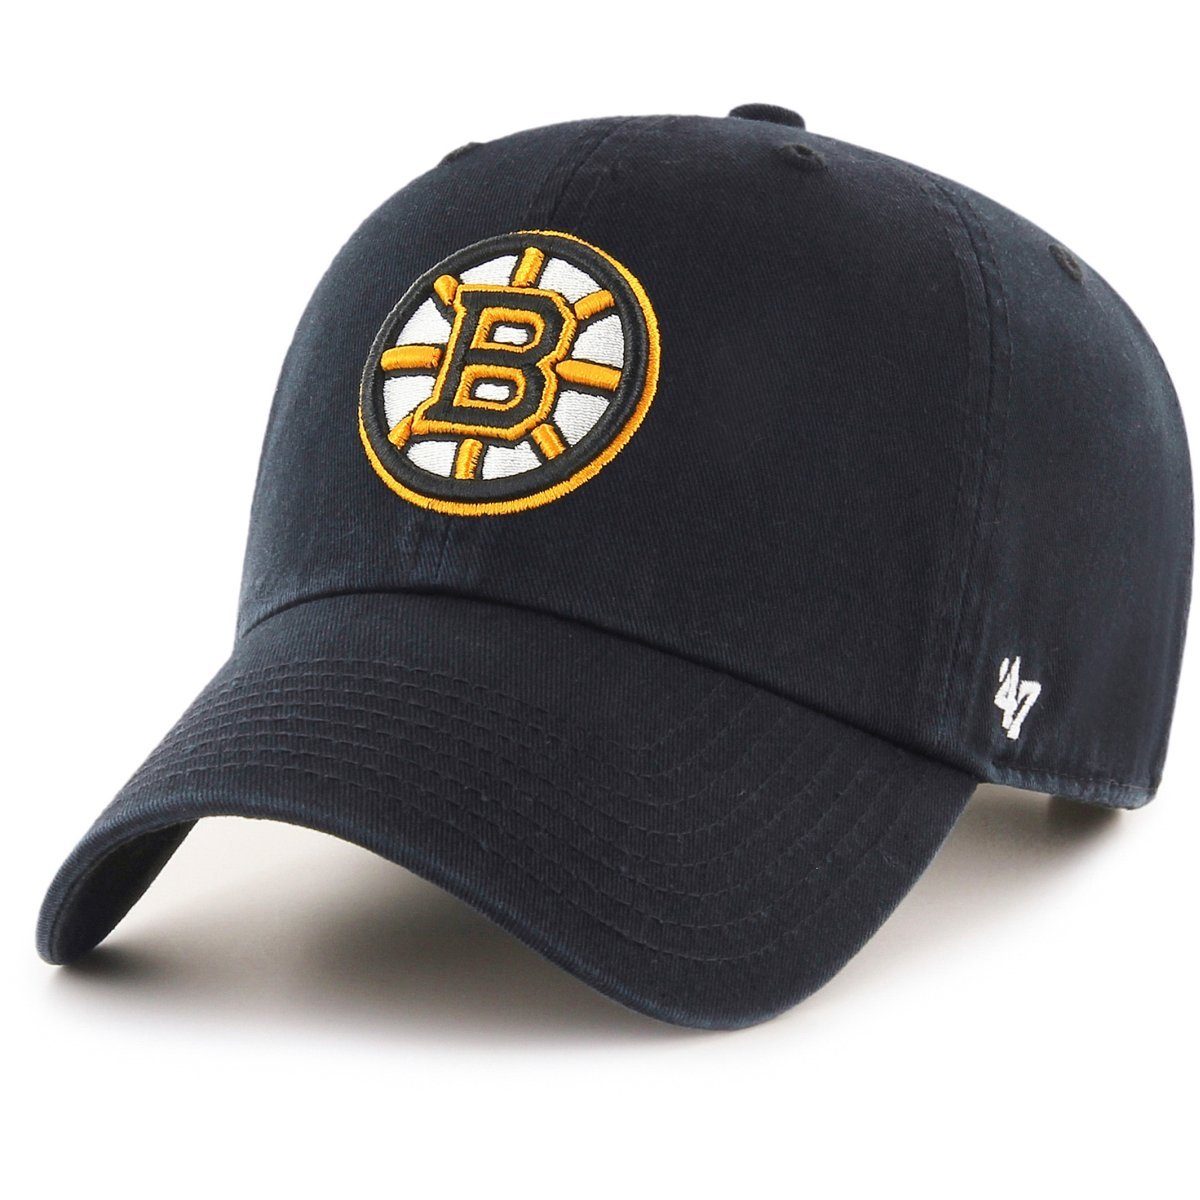 Relaxed Brand Fit UP Cap '47 Trucker CLEAN Bruins Boston